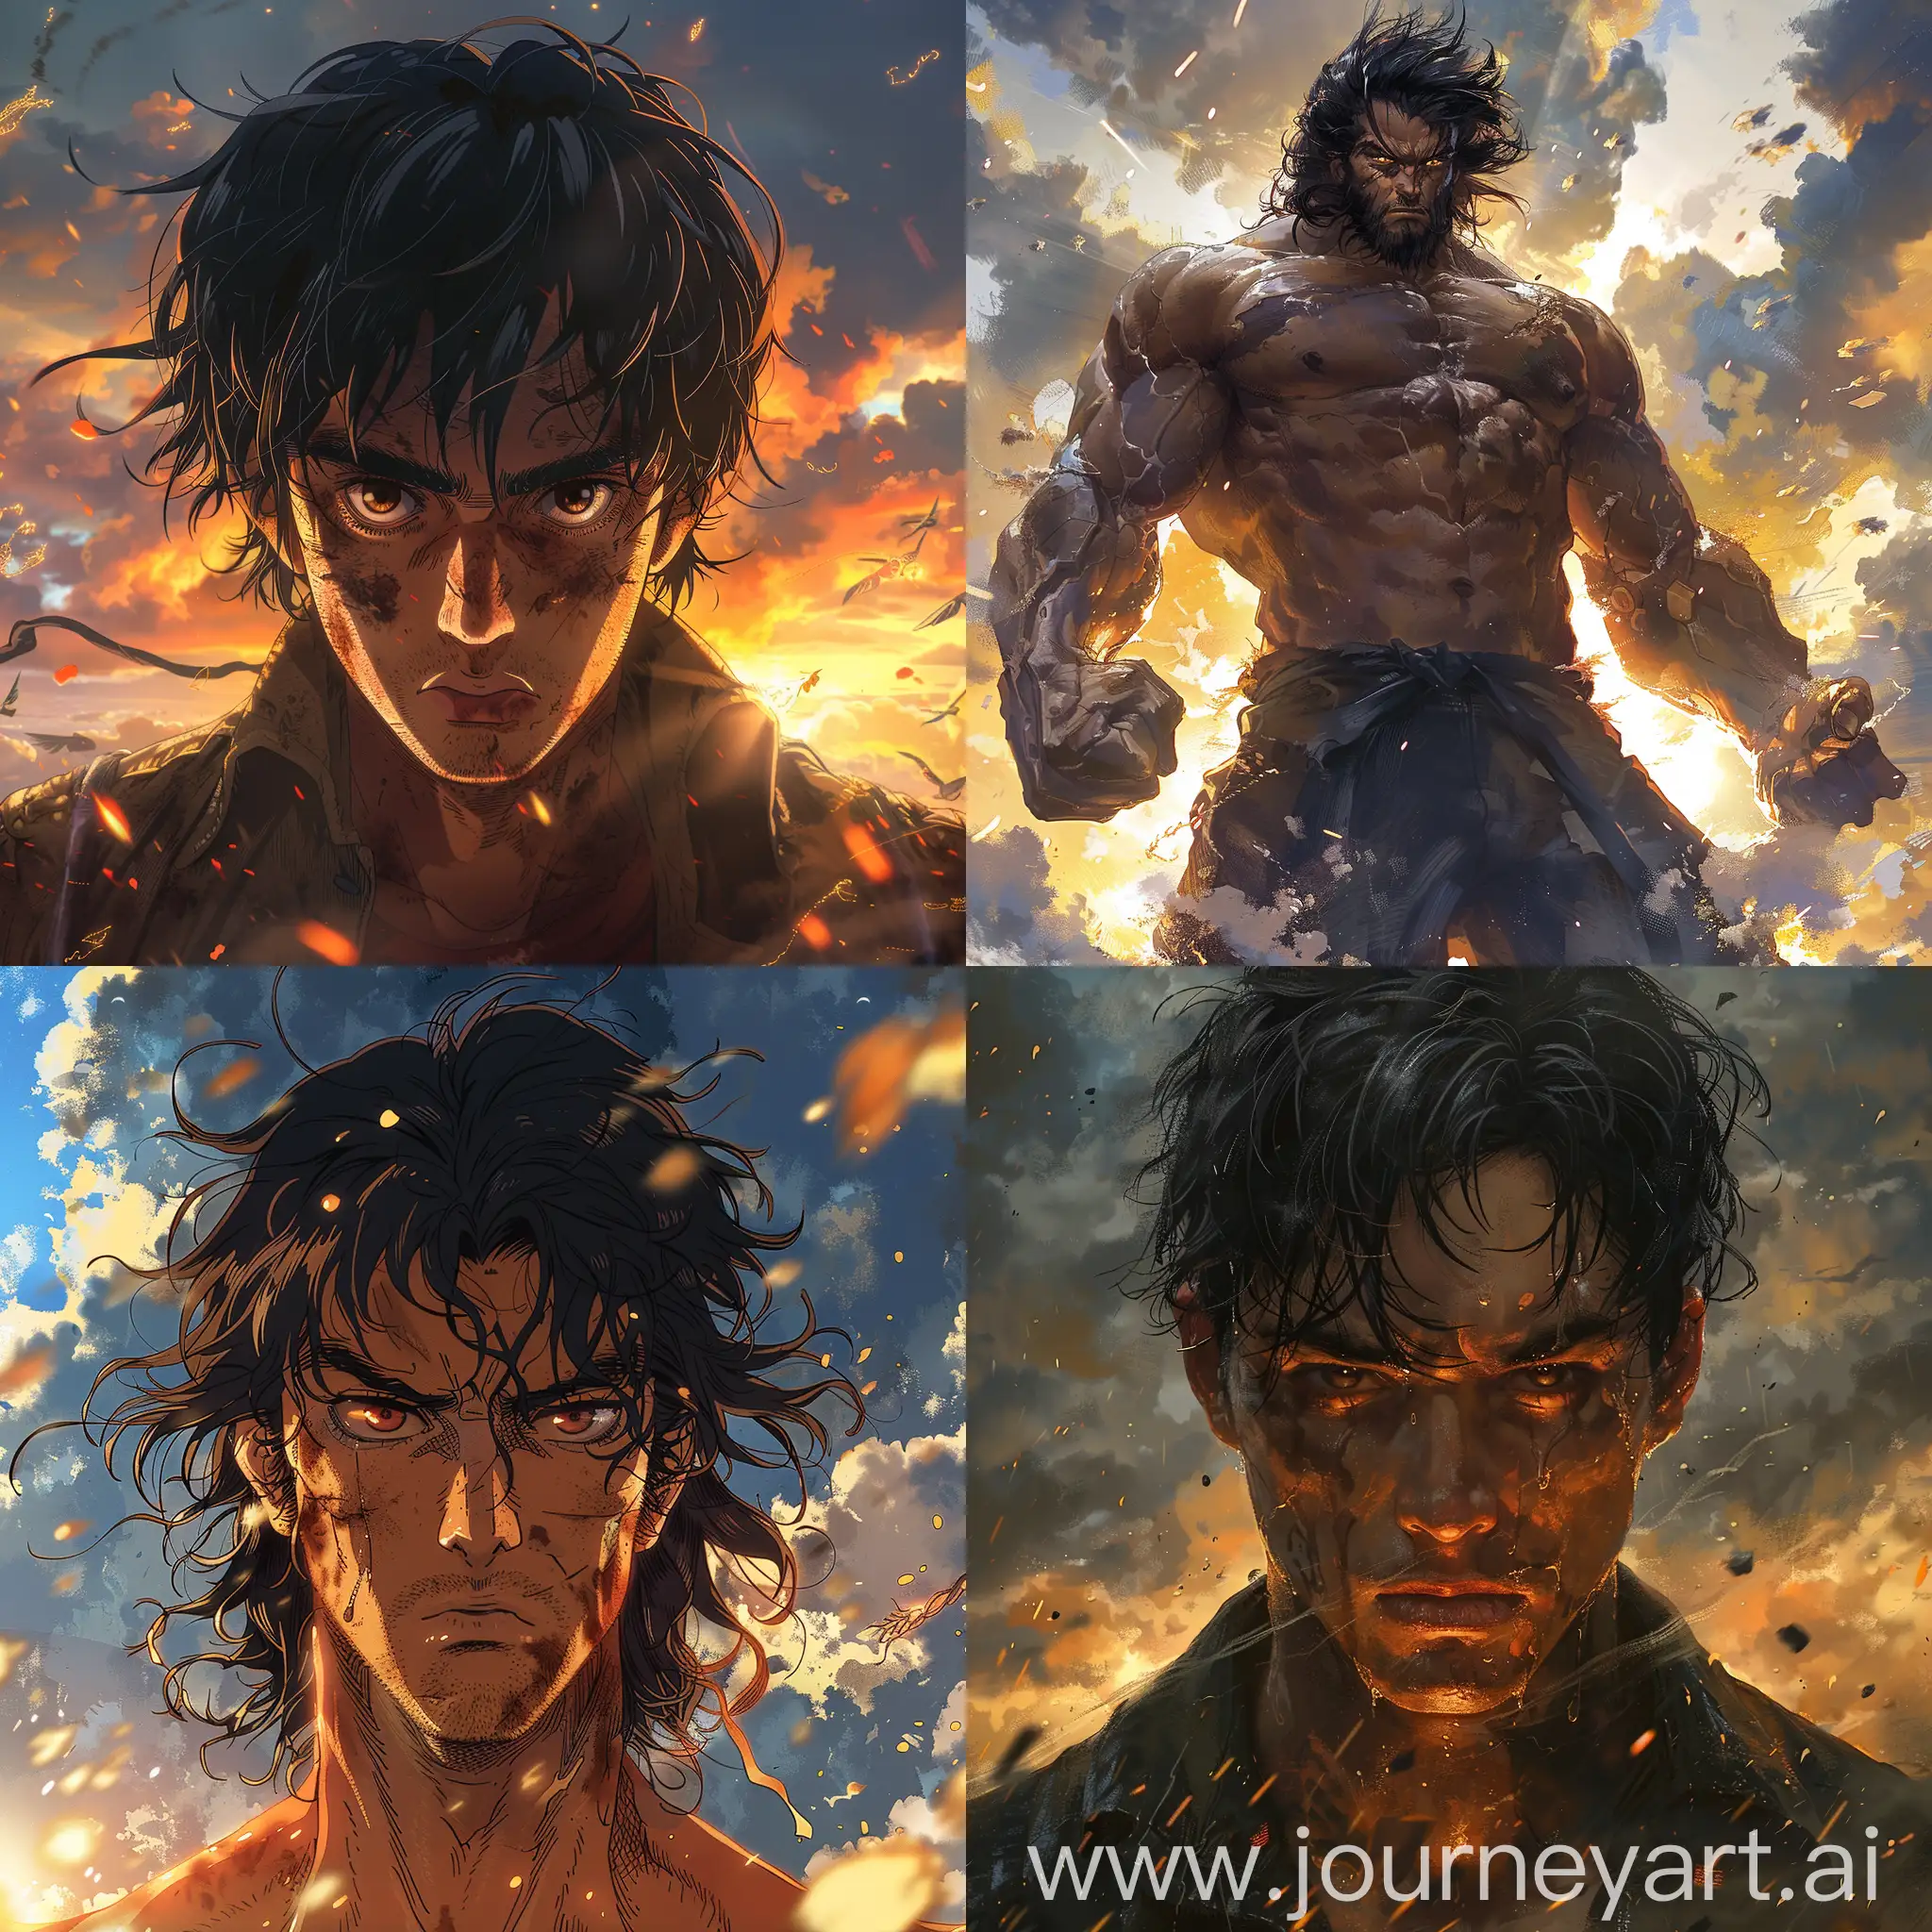 Anime::1.3 a giant male, standing in front of a sky background with black and yellow hues, the man has dark hair and looks powerful and angry, he has large muscles and bright orange eyes --s 500